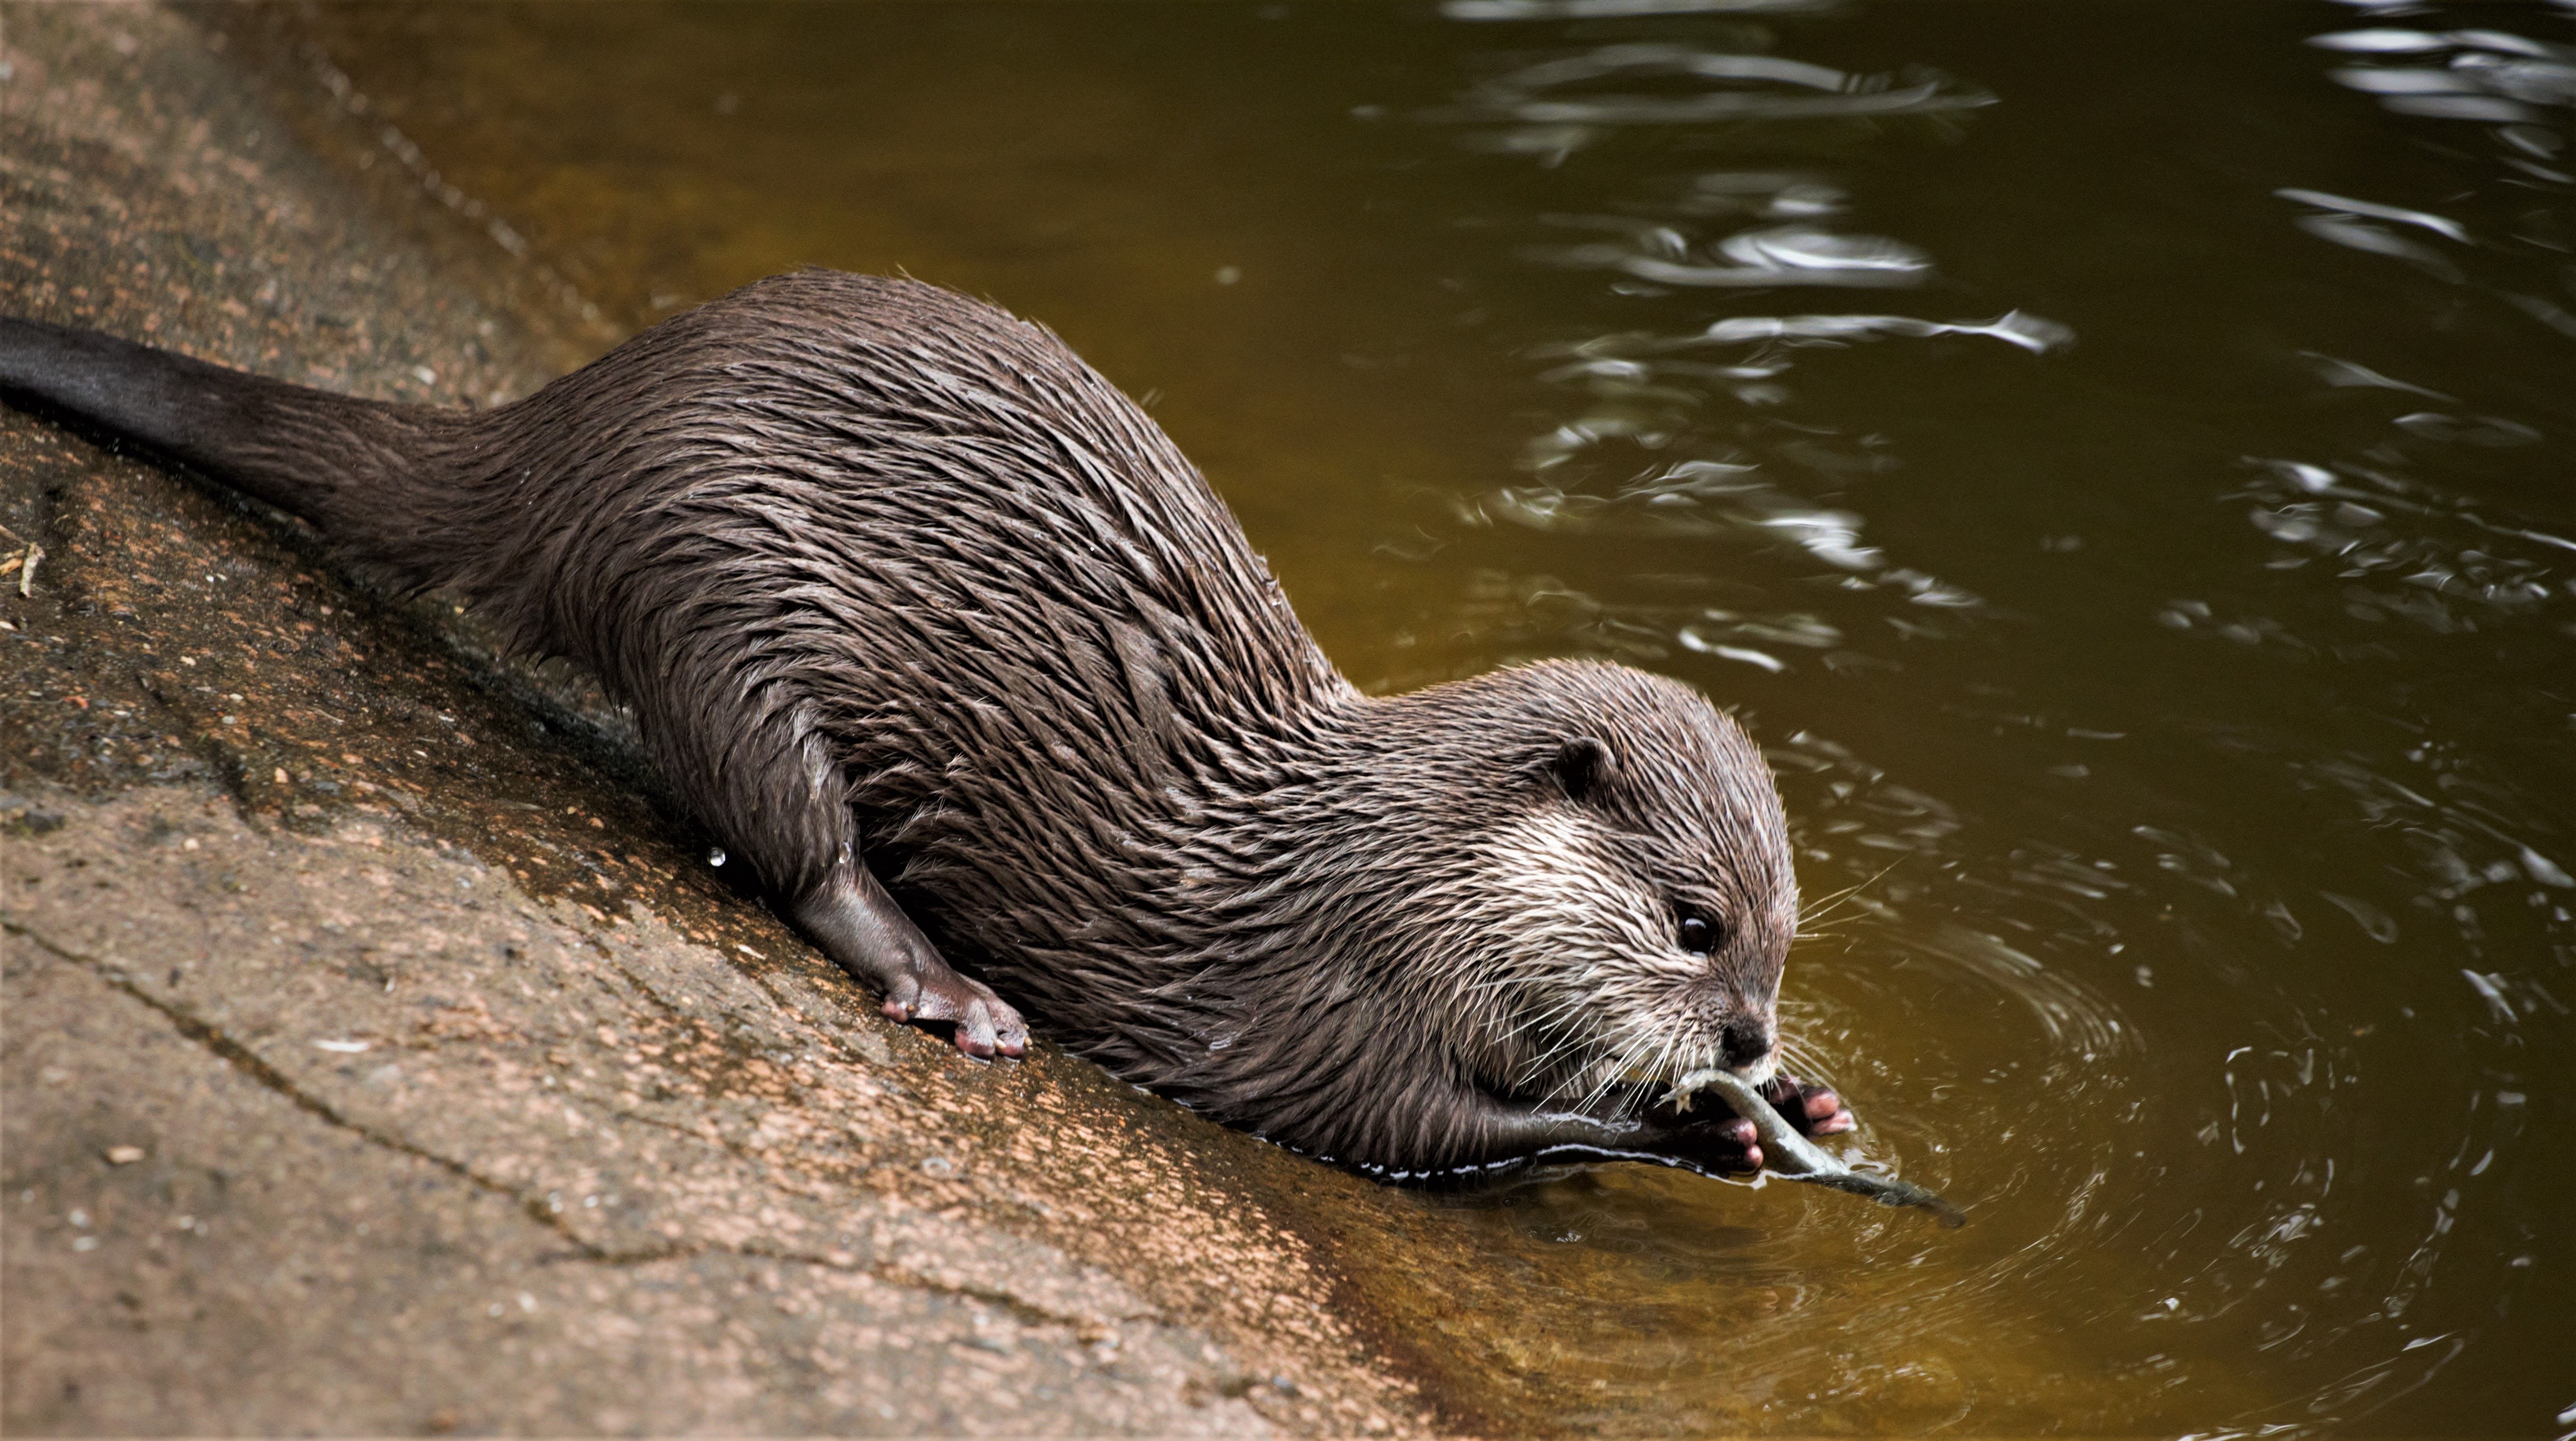 An Otter Snacks on a Fish